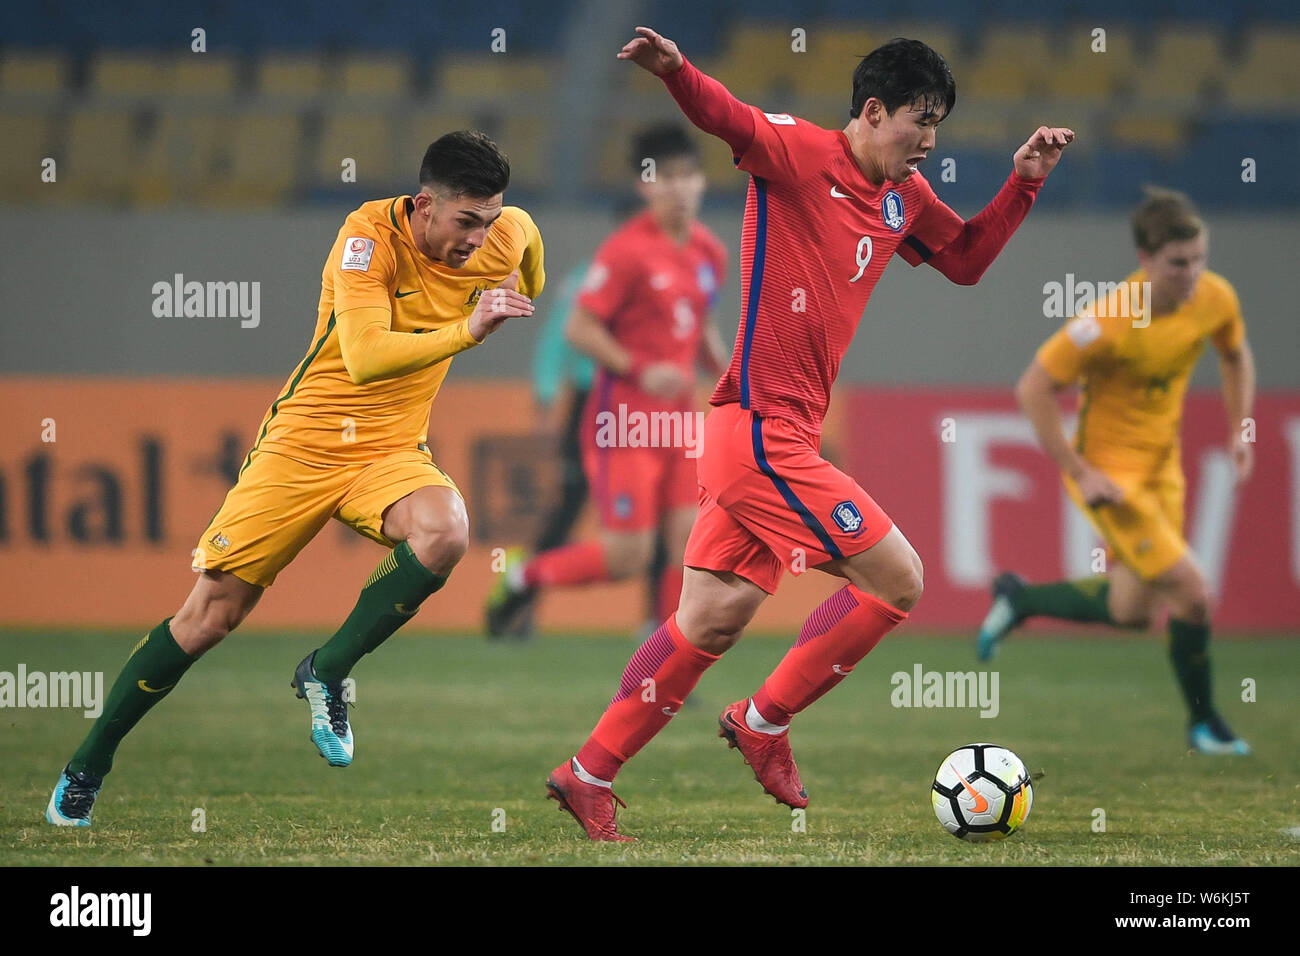 Lee Keun-ho, right, of South Korea kicks the ball to make a pass against a player of Australia in their Group D match during the 2018 AFC U-23 Champio Stock Photo